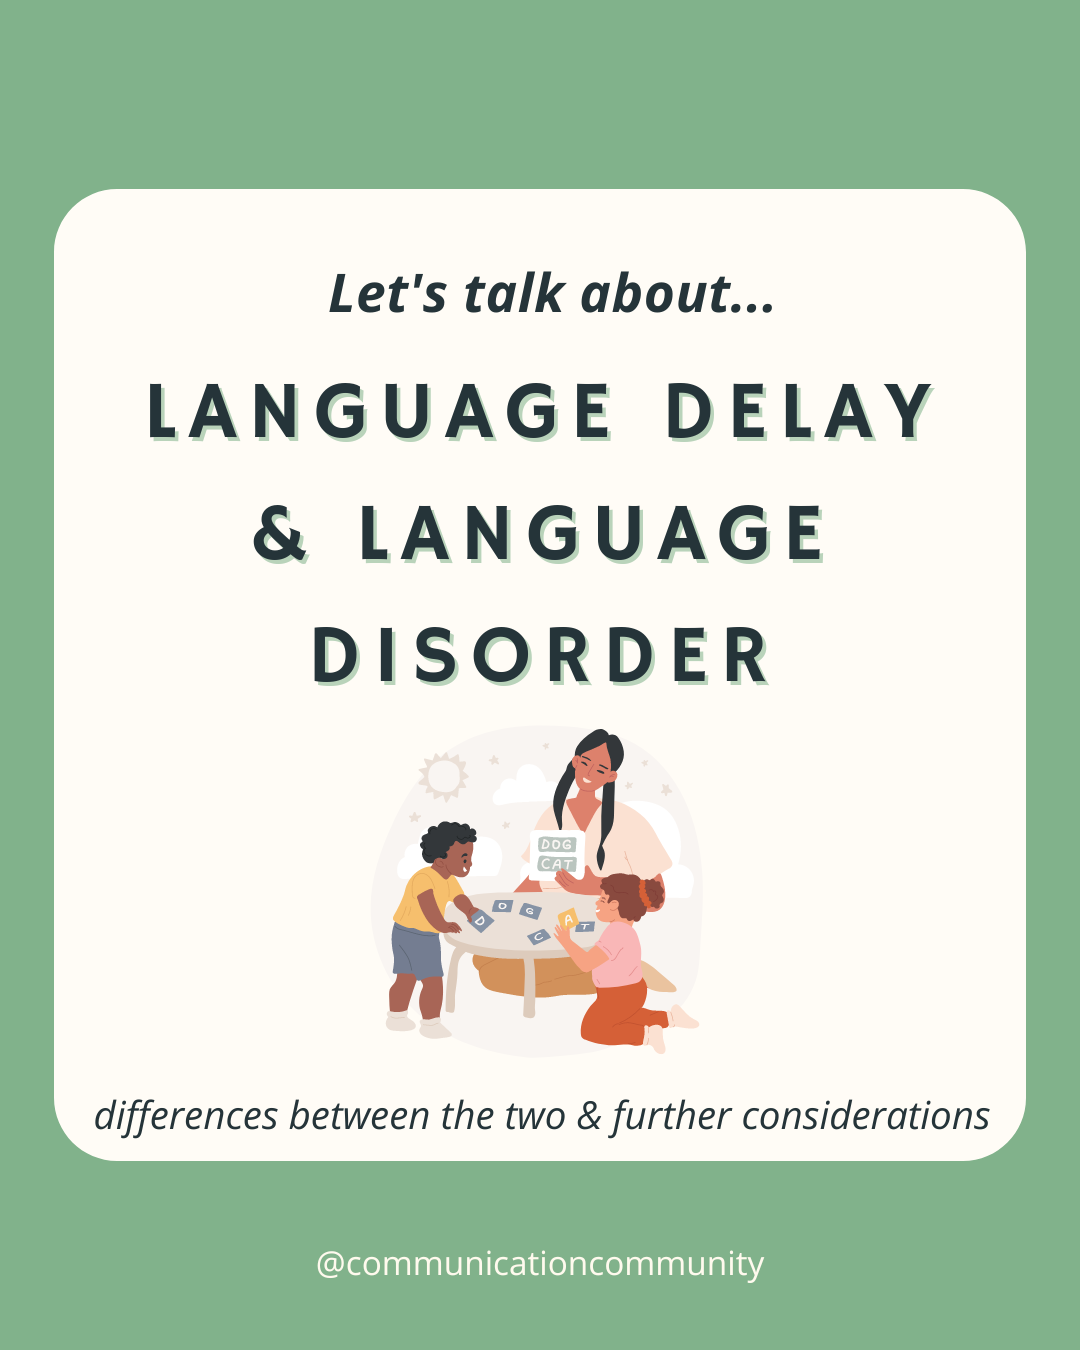 speech language delay meaning